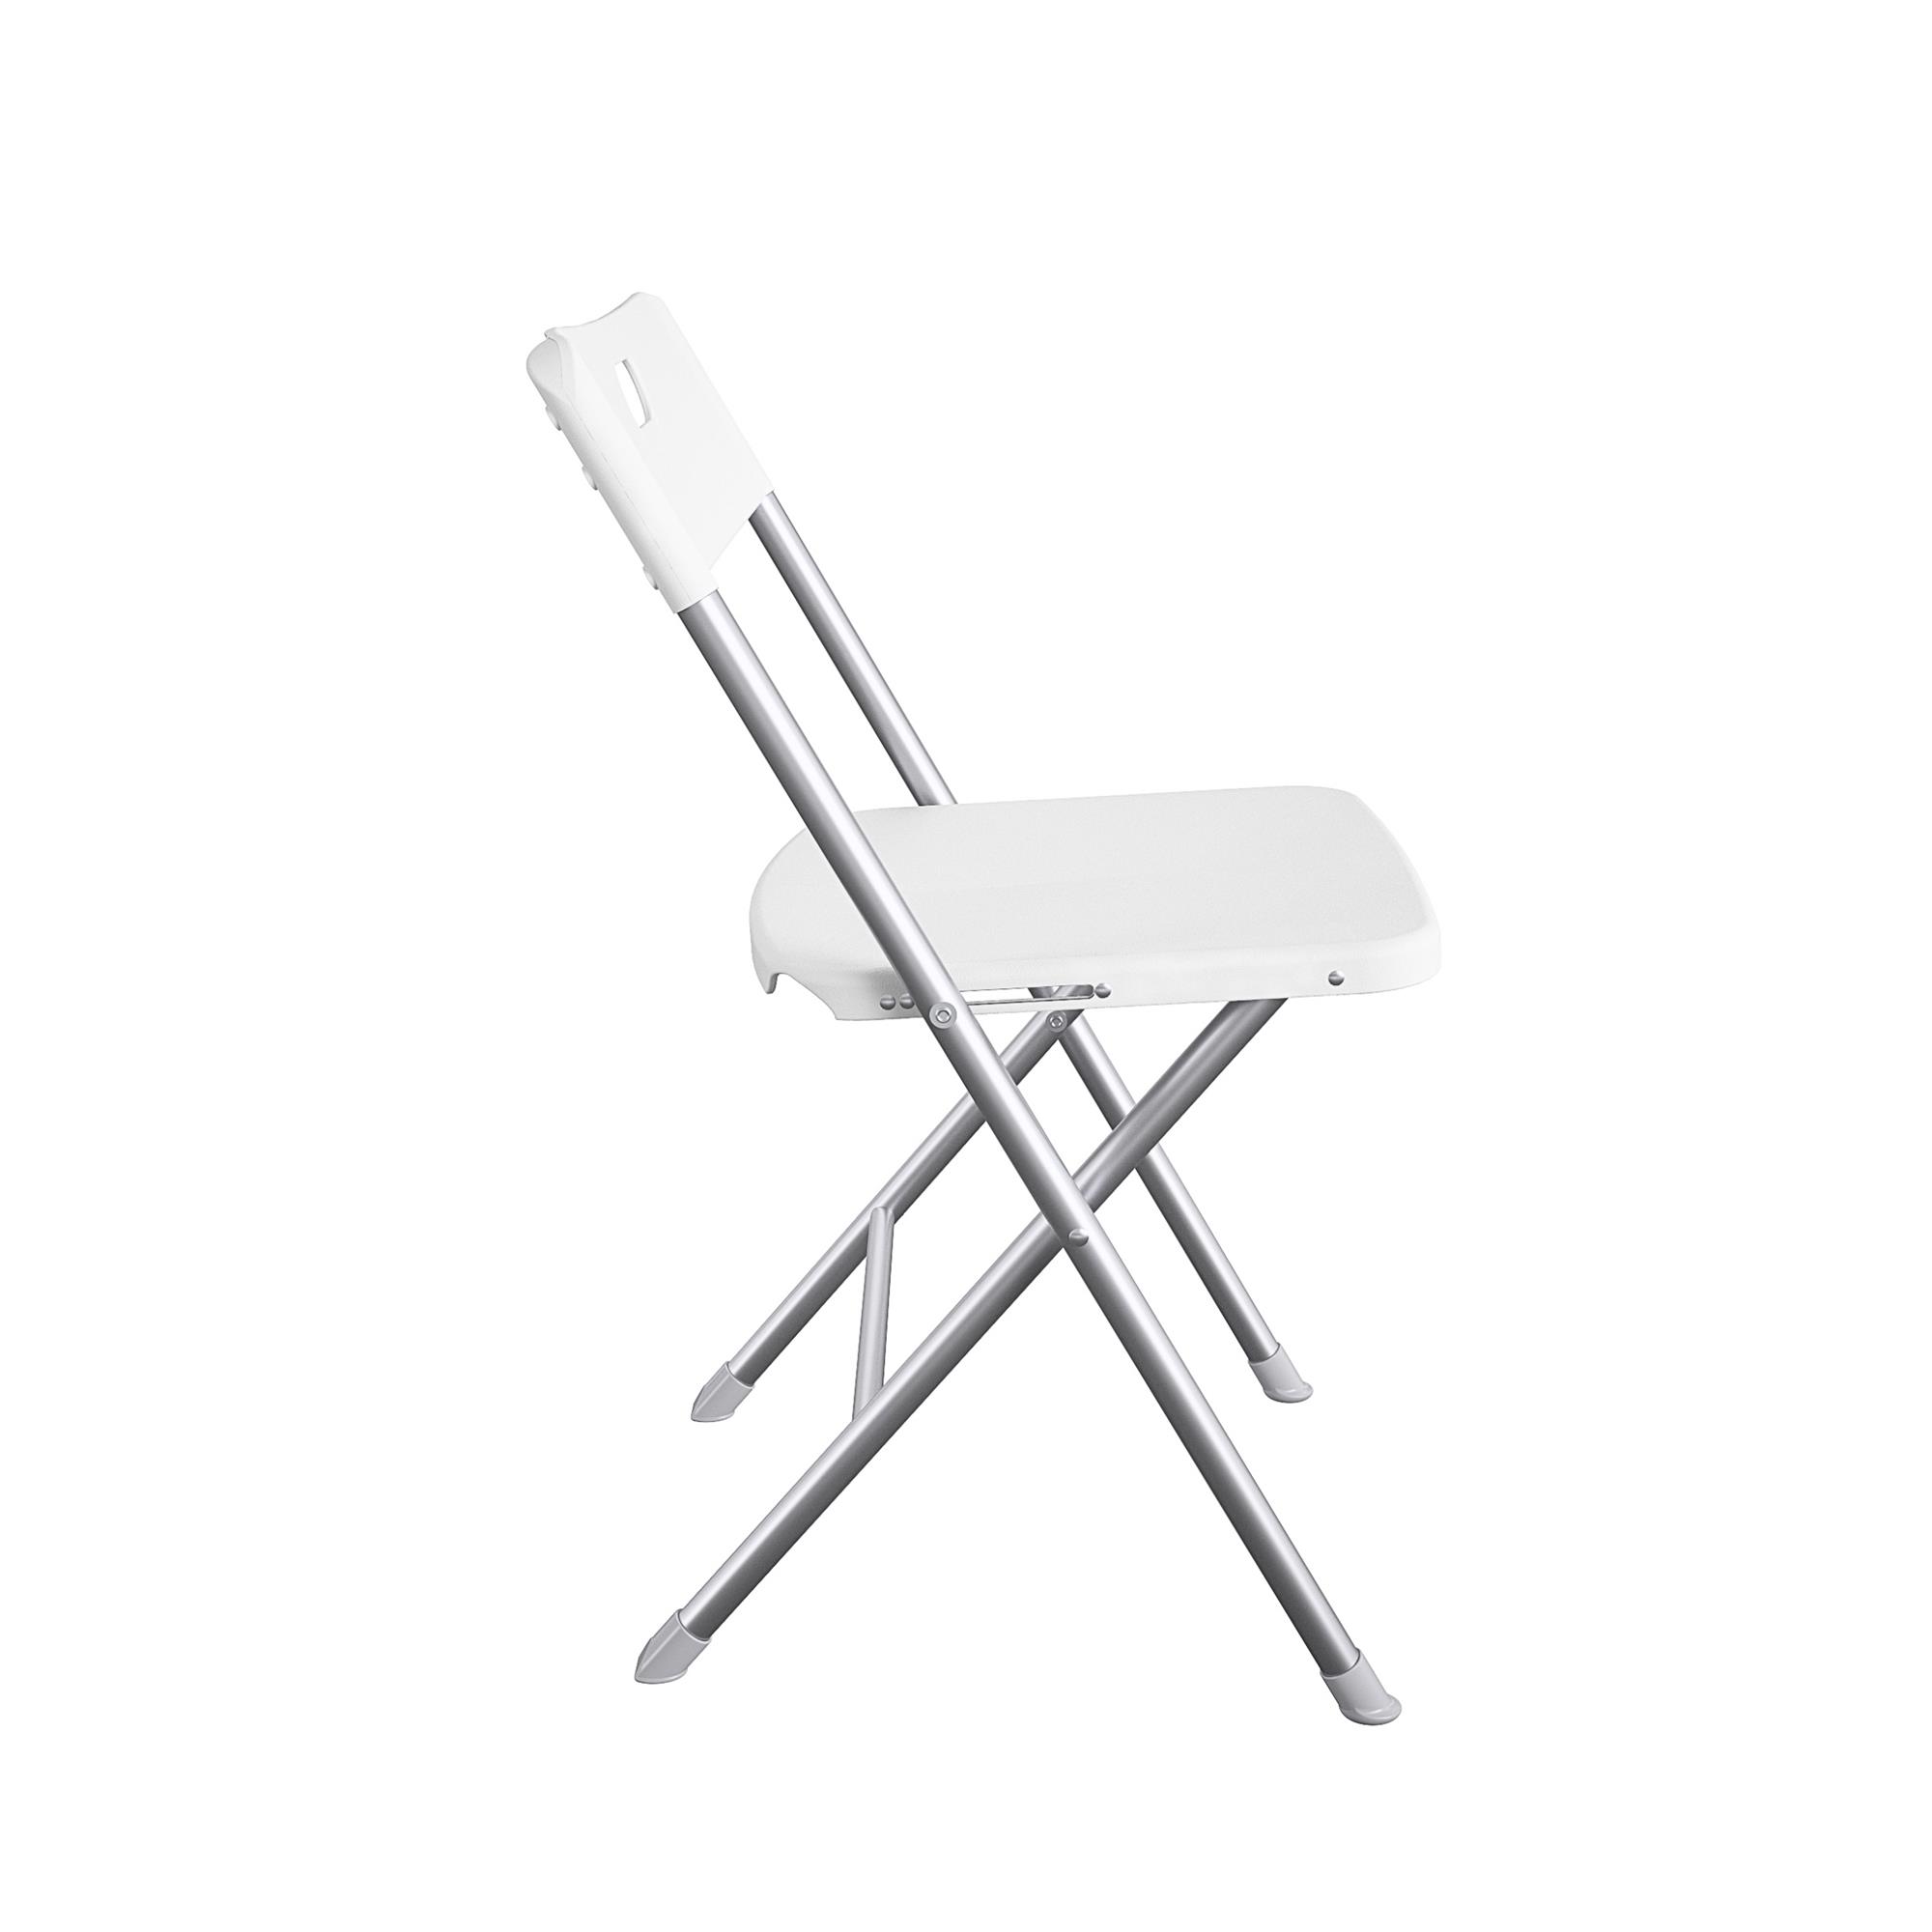 Mainstays Resin Seat & Back Folding Chair, White - image 5 of 7